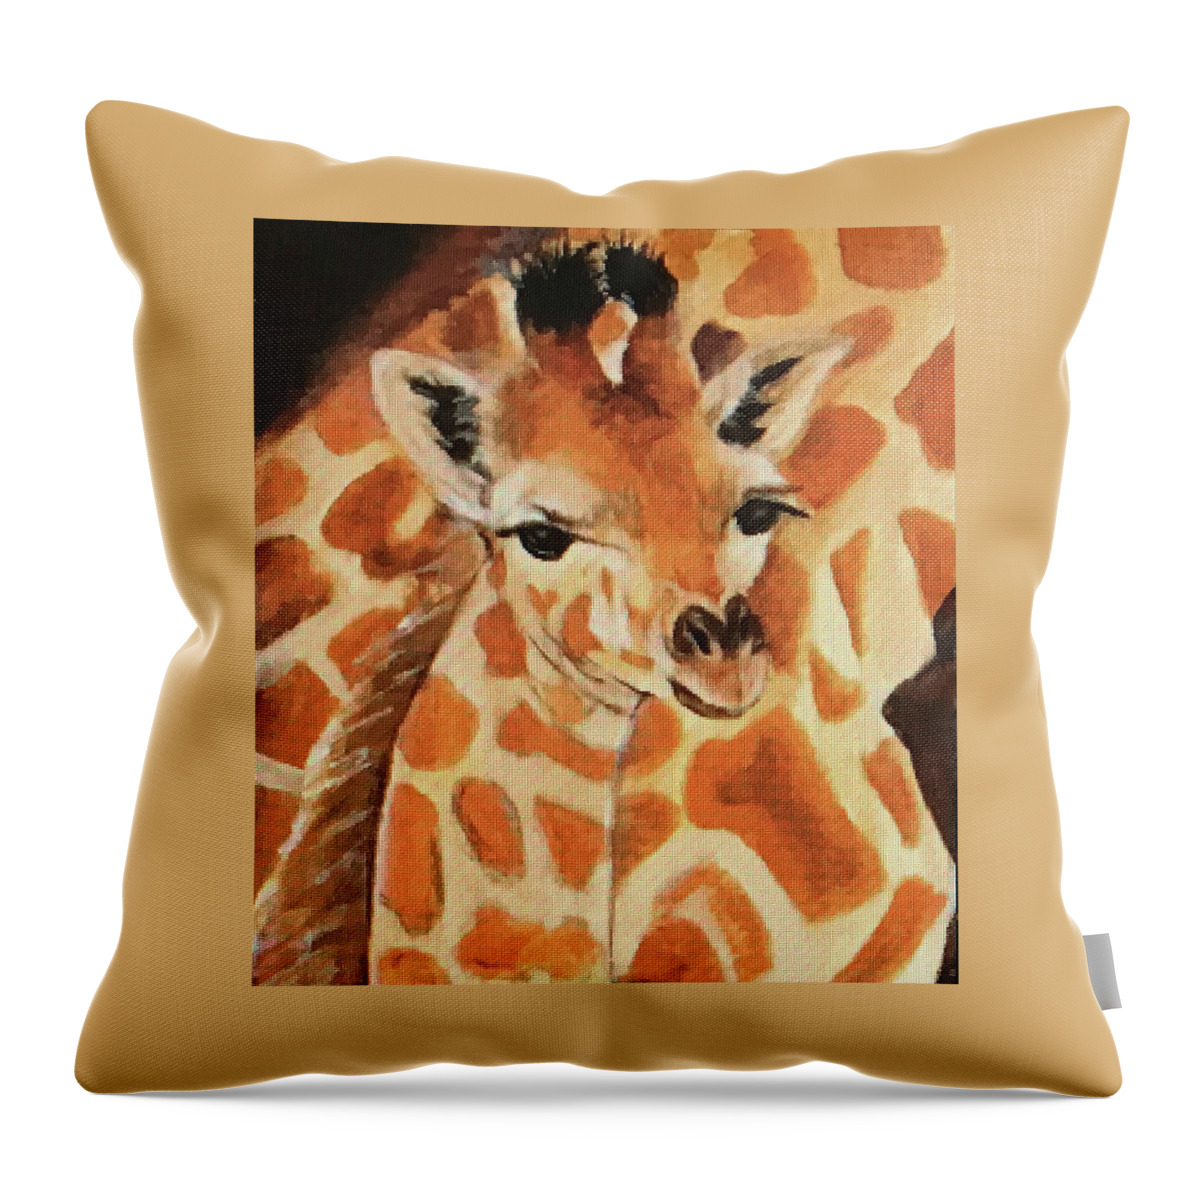 Art Throw Pillow featuring the painting Giraffe by Tammy Pool